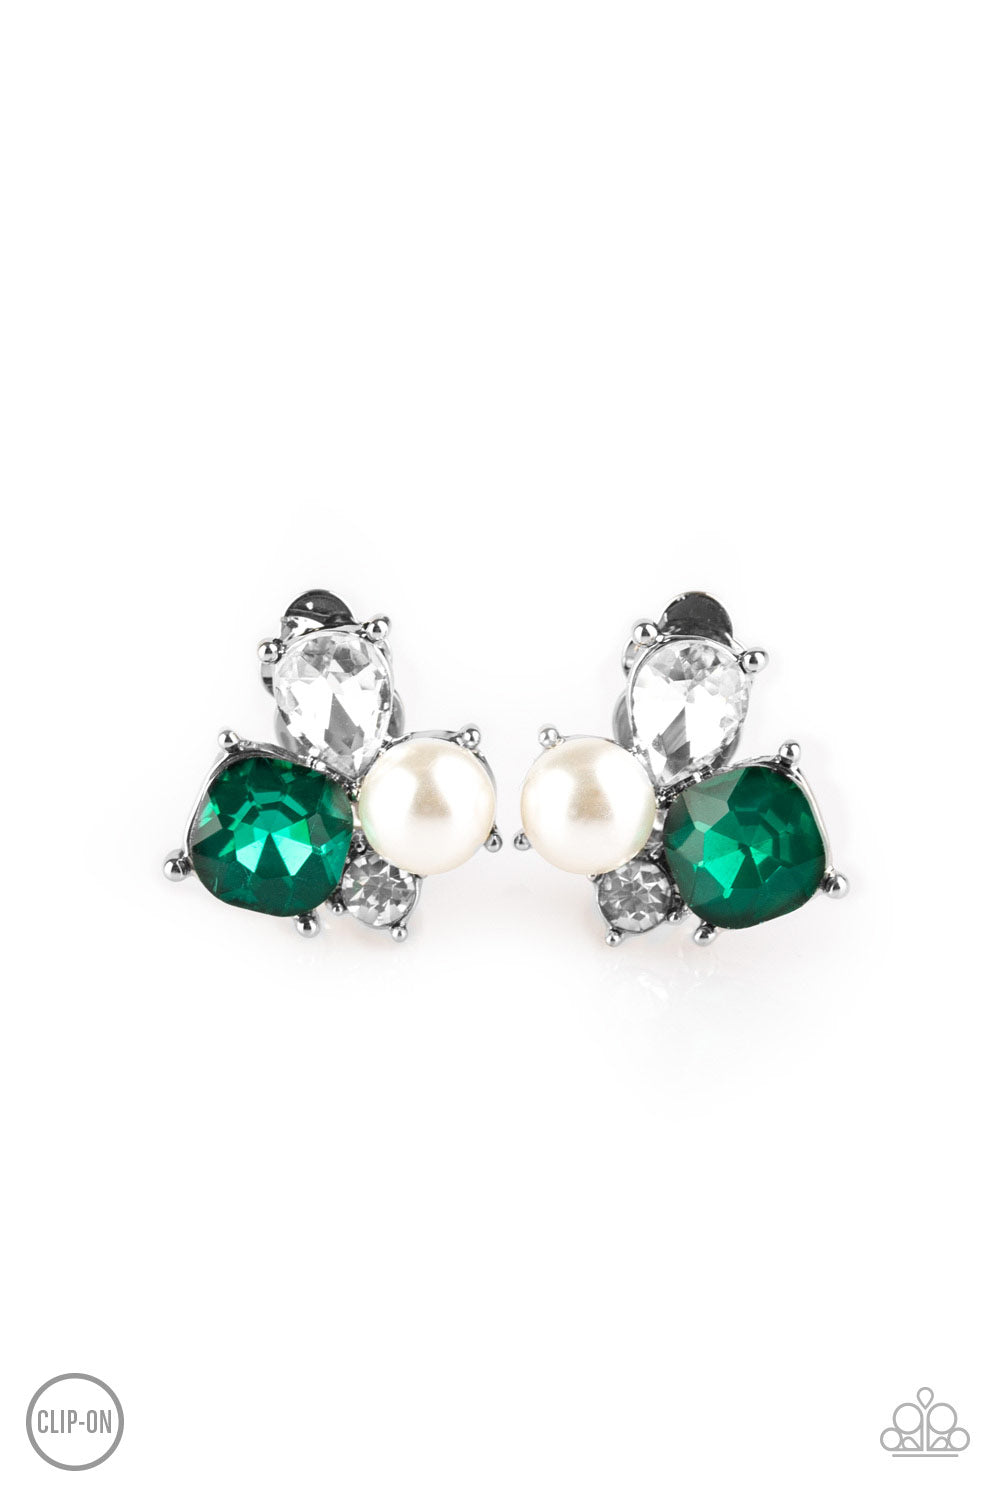 Highly High-Class - Green Clip-On Earrings - Princess Glam Shop